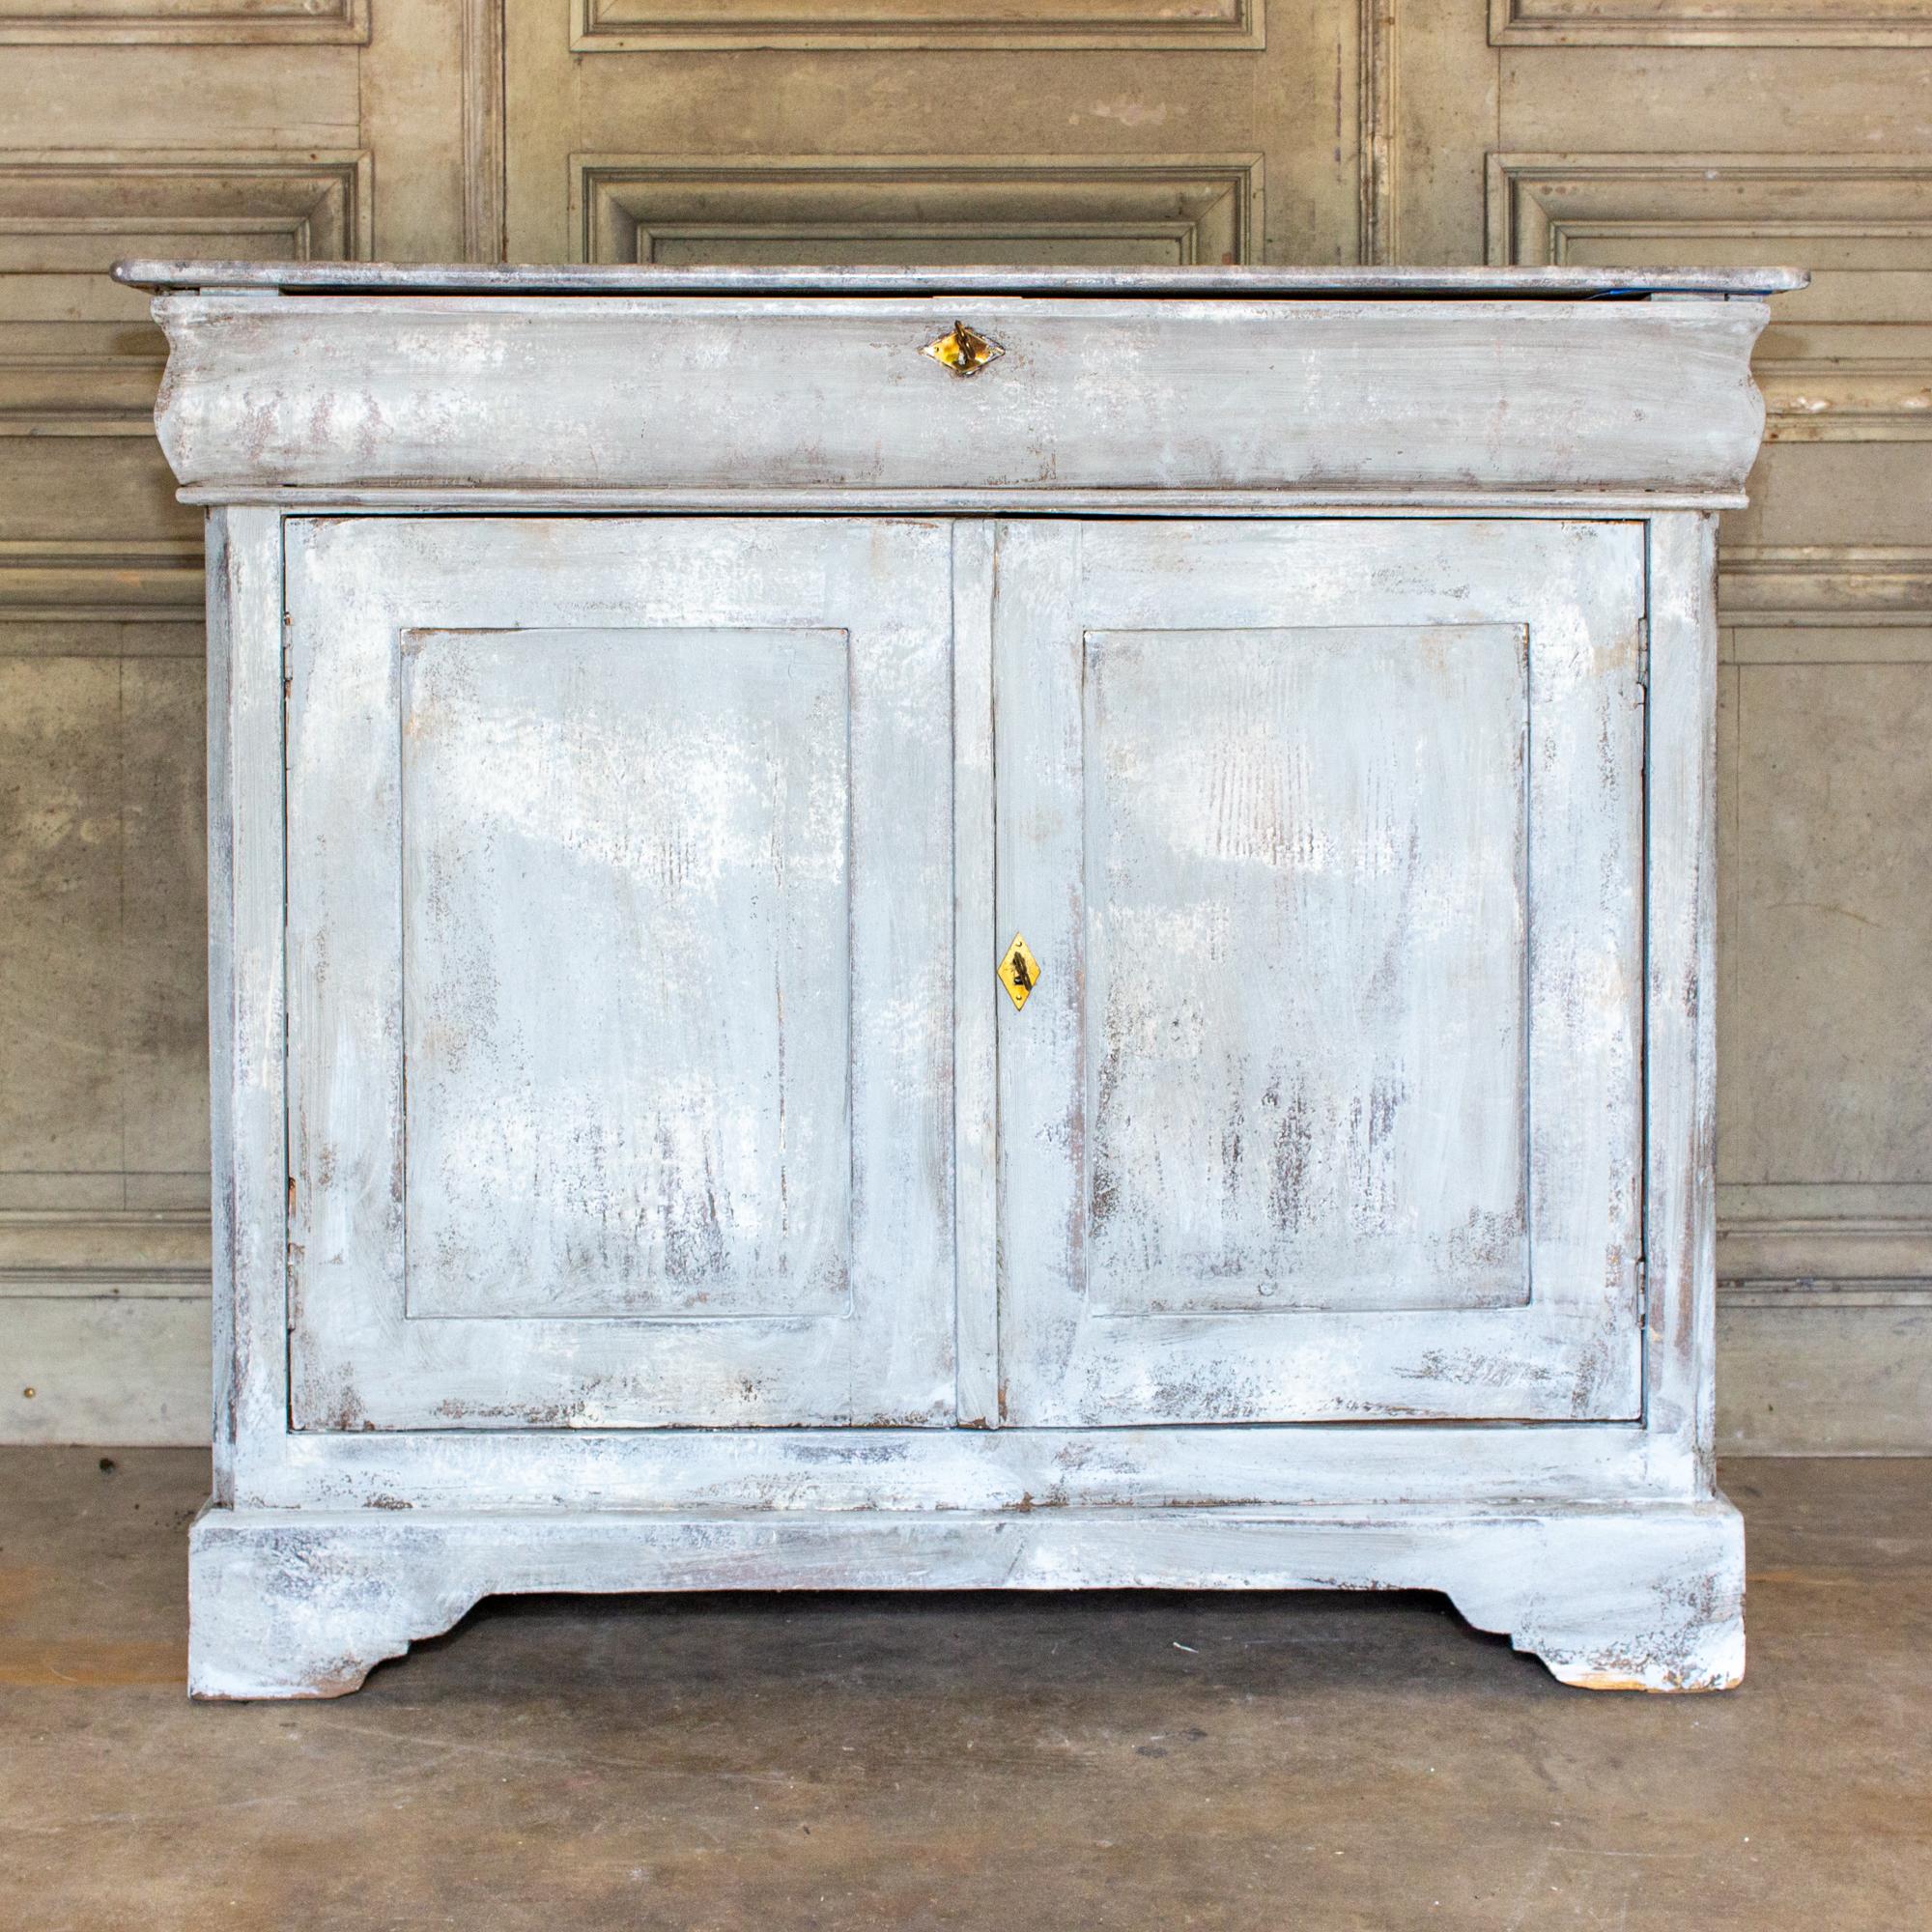 This antique French pine buffet has been given new life with an expertly hand-painted and distressed greige finish. The top has been painted to mimic the stone and has a higher gloss finish than the body of the cabinet. The top drawer features a key